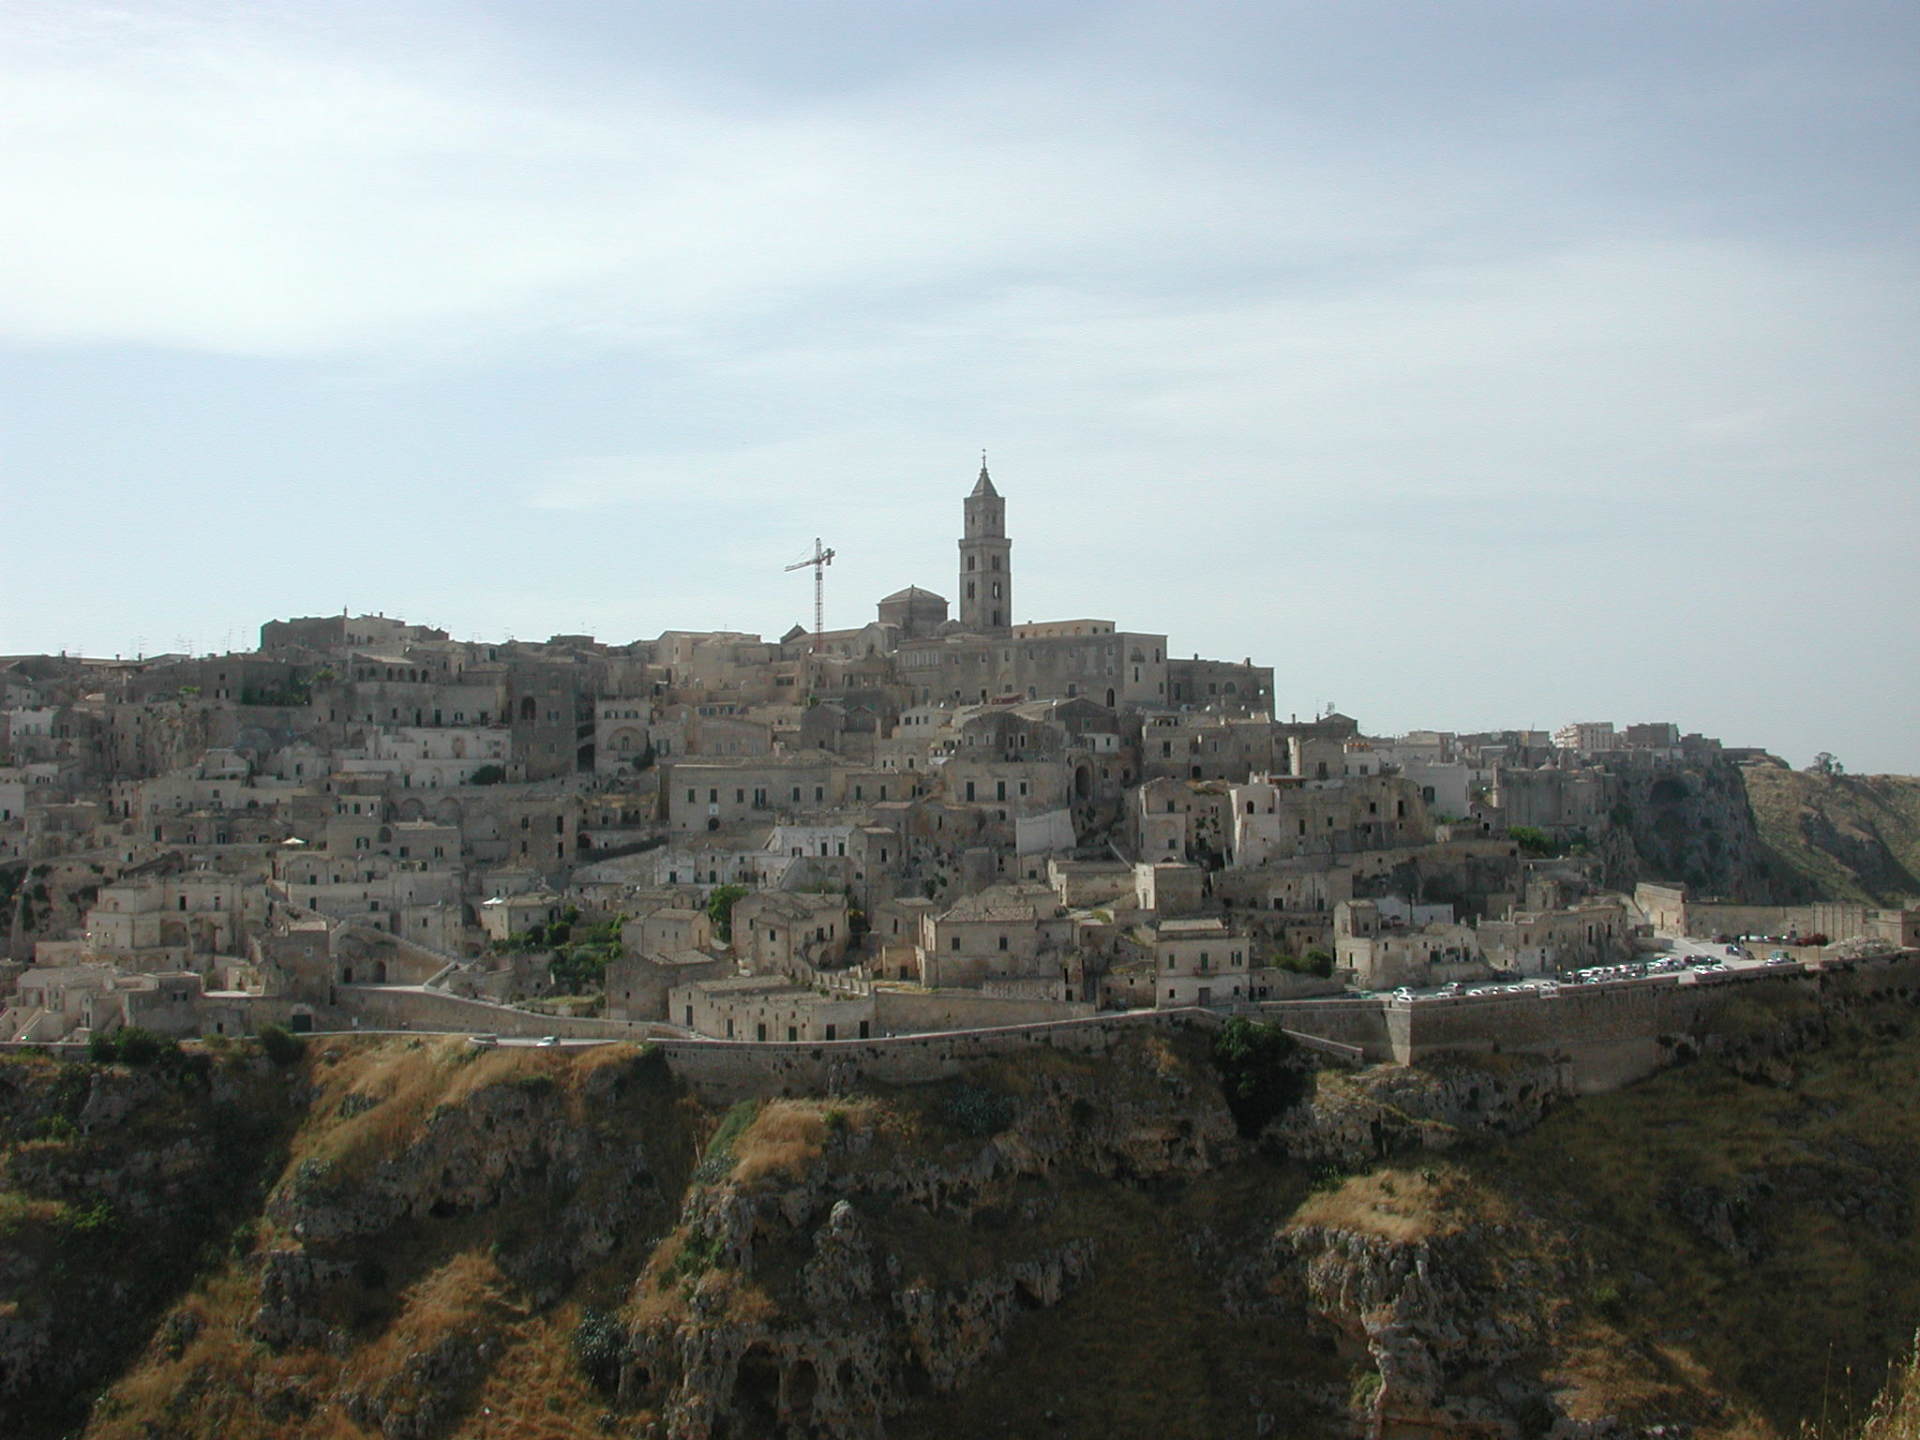 The city of Matera where people live in cave homes.